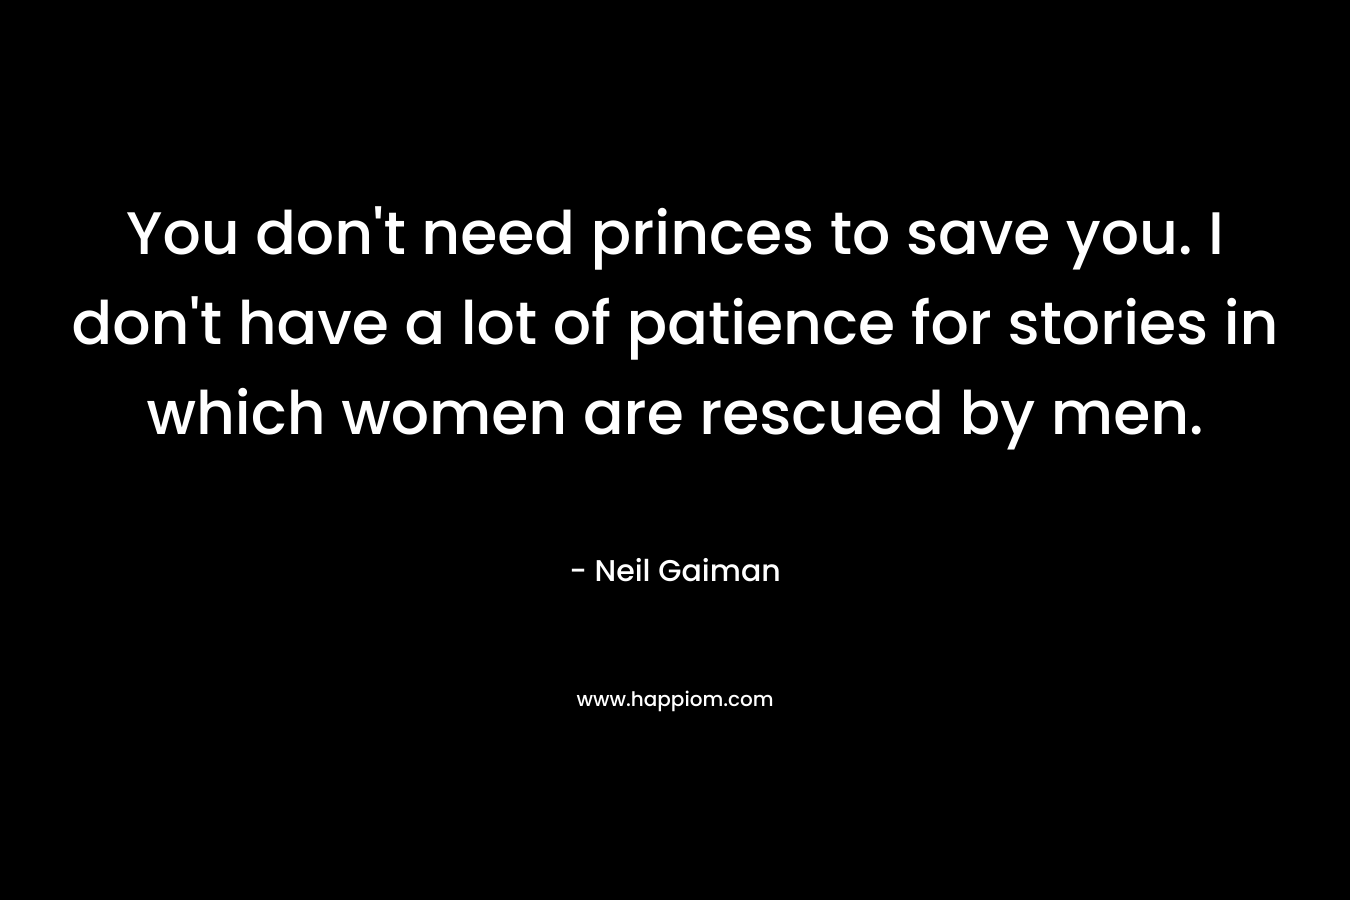 You don’t need princes to save you. I don’t have a lot of patience for stories in which women are rescued by men. – Neil Gaiman